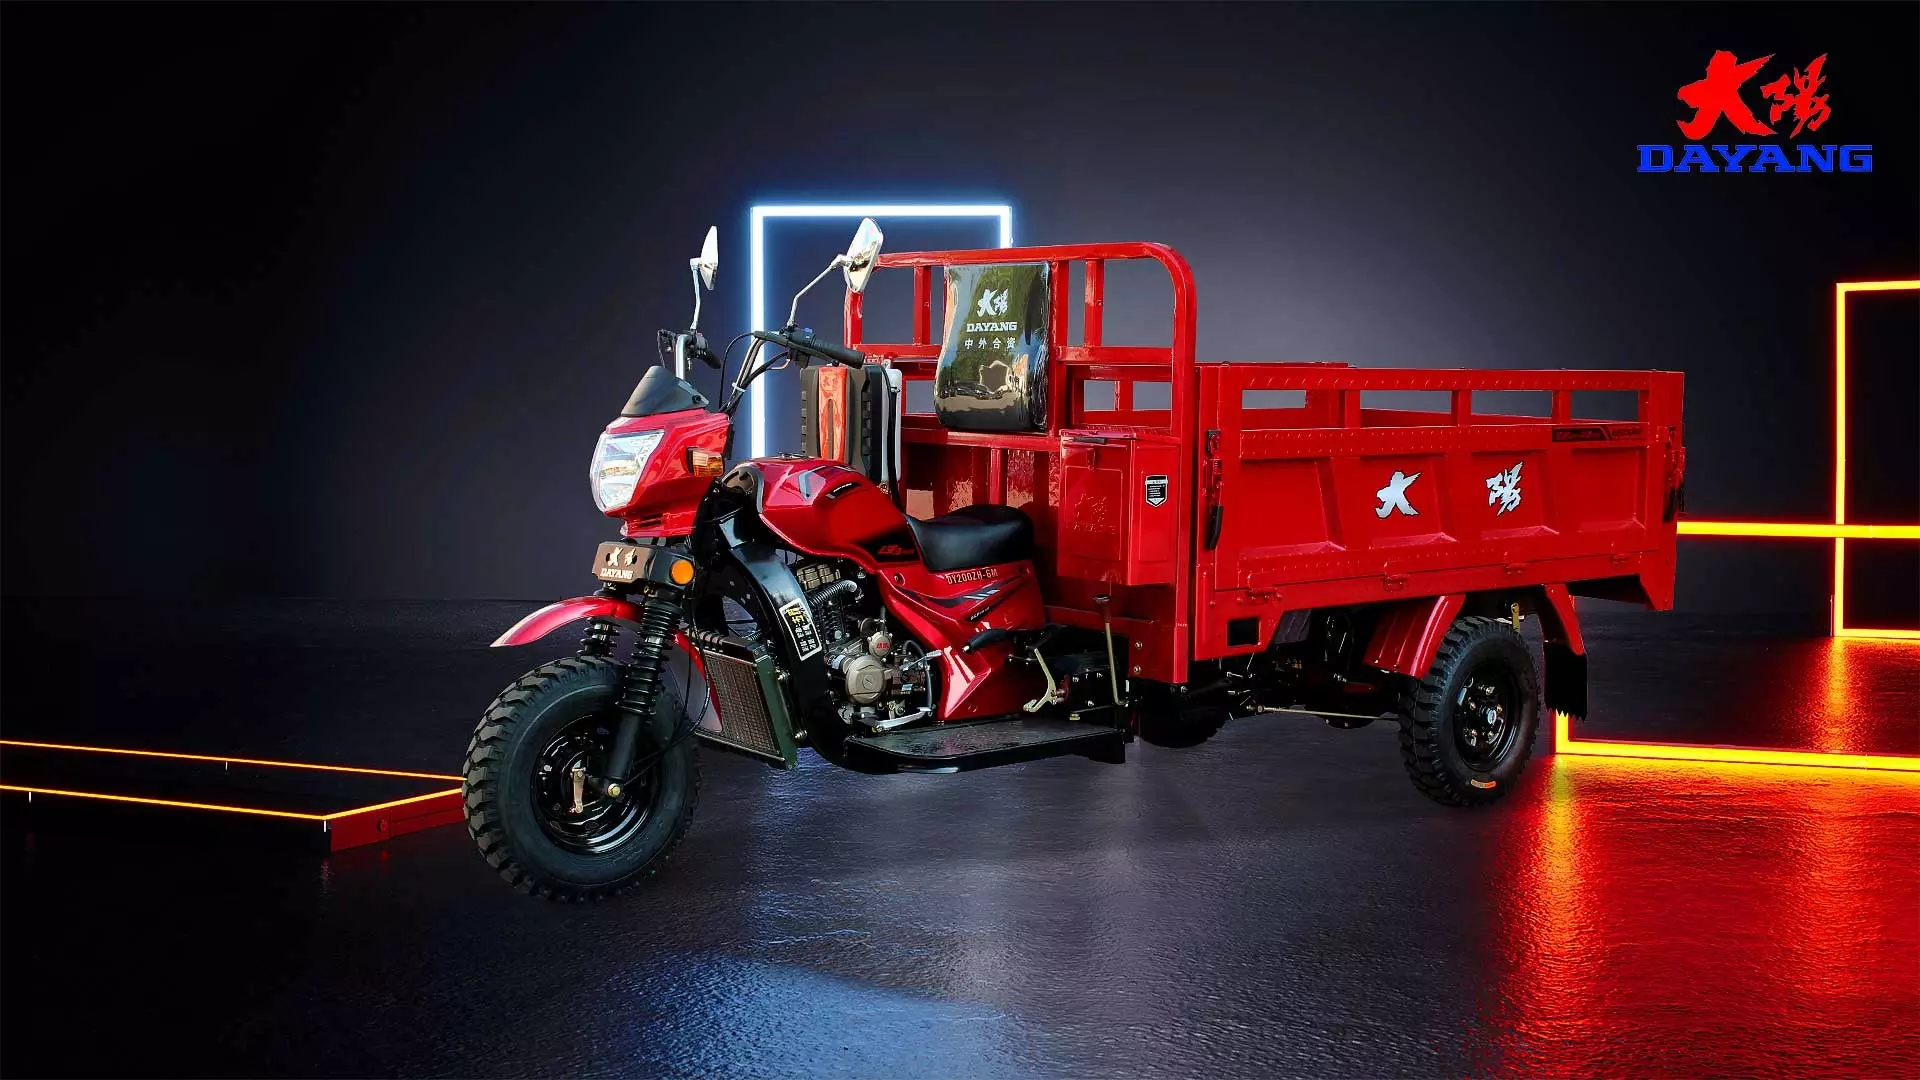 China manufacturers gasoline 3 wheel High quality adult heavy load 250cc farming truck cargo tricycle